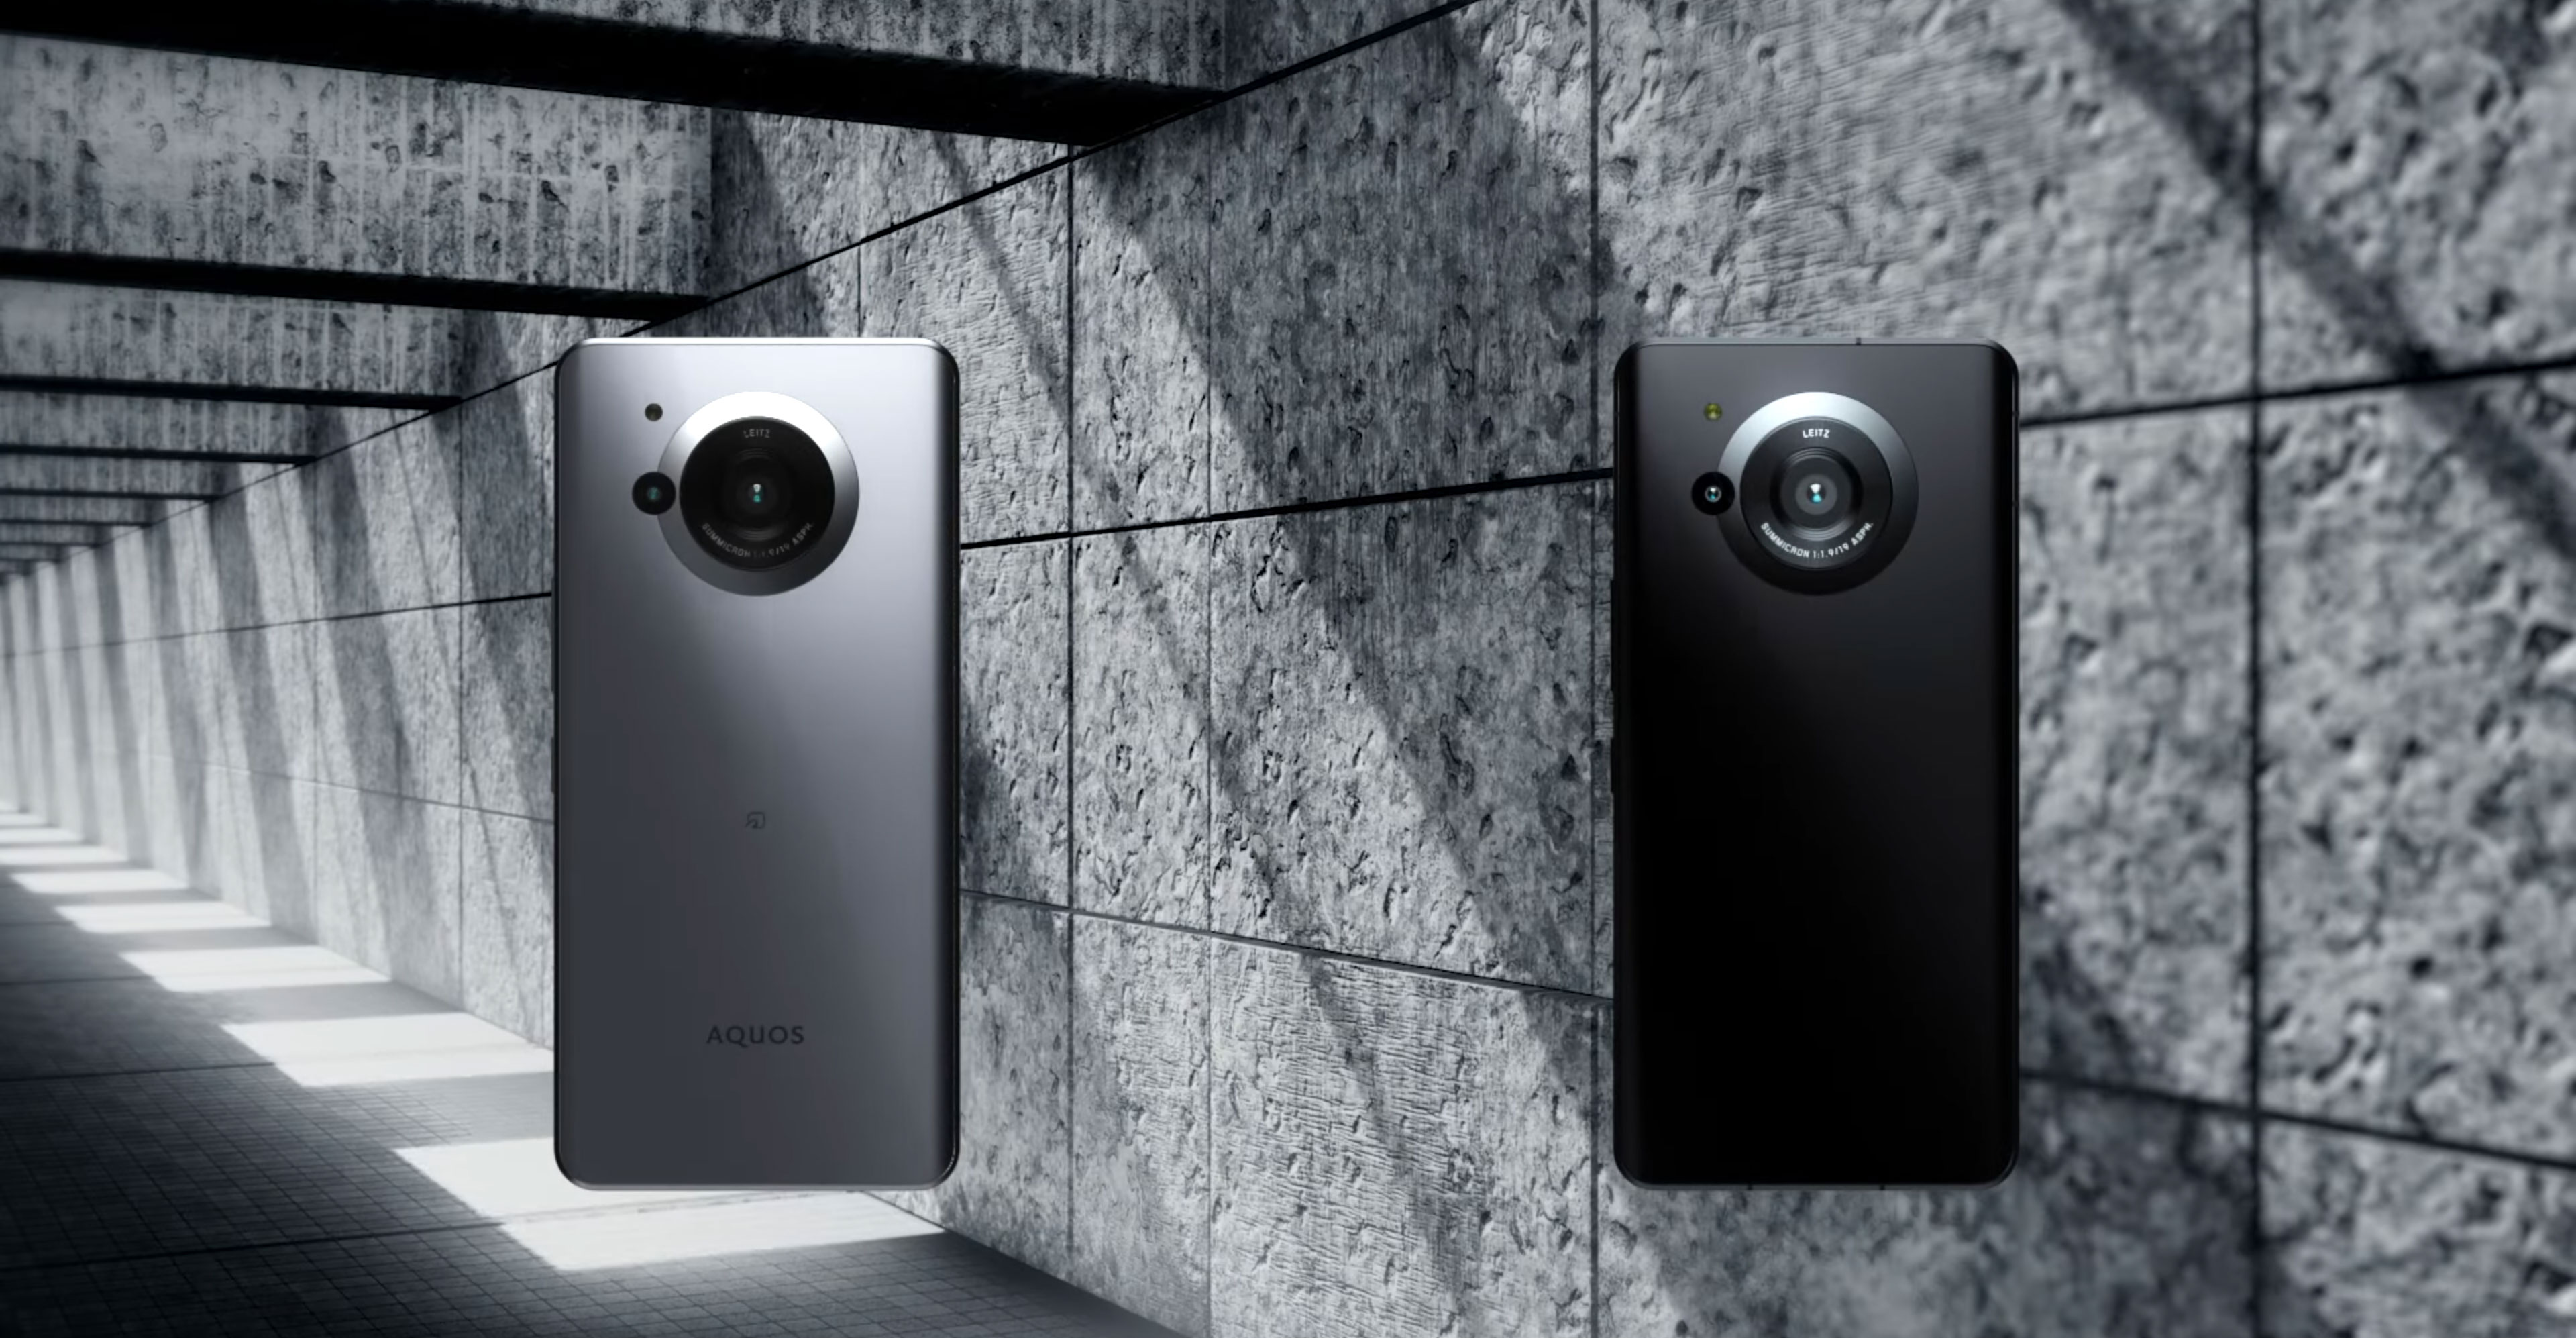 You have to see the Sharp Aquos R7's massive camera | Digital Trends